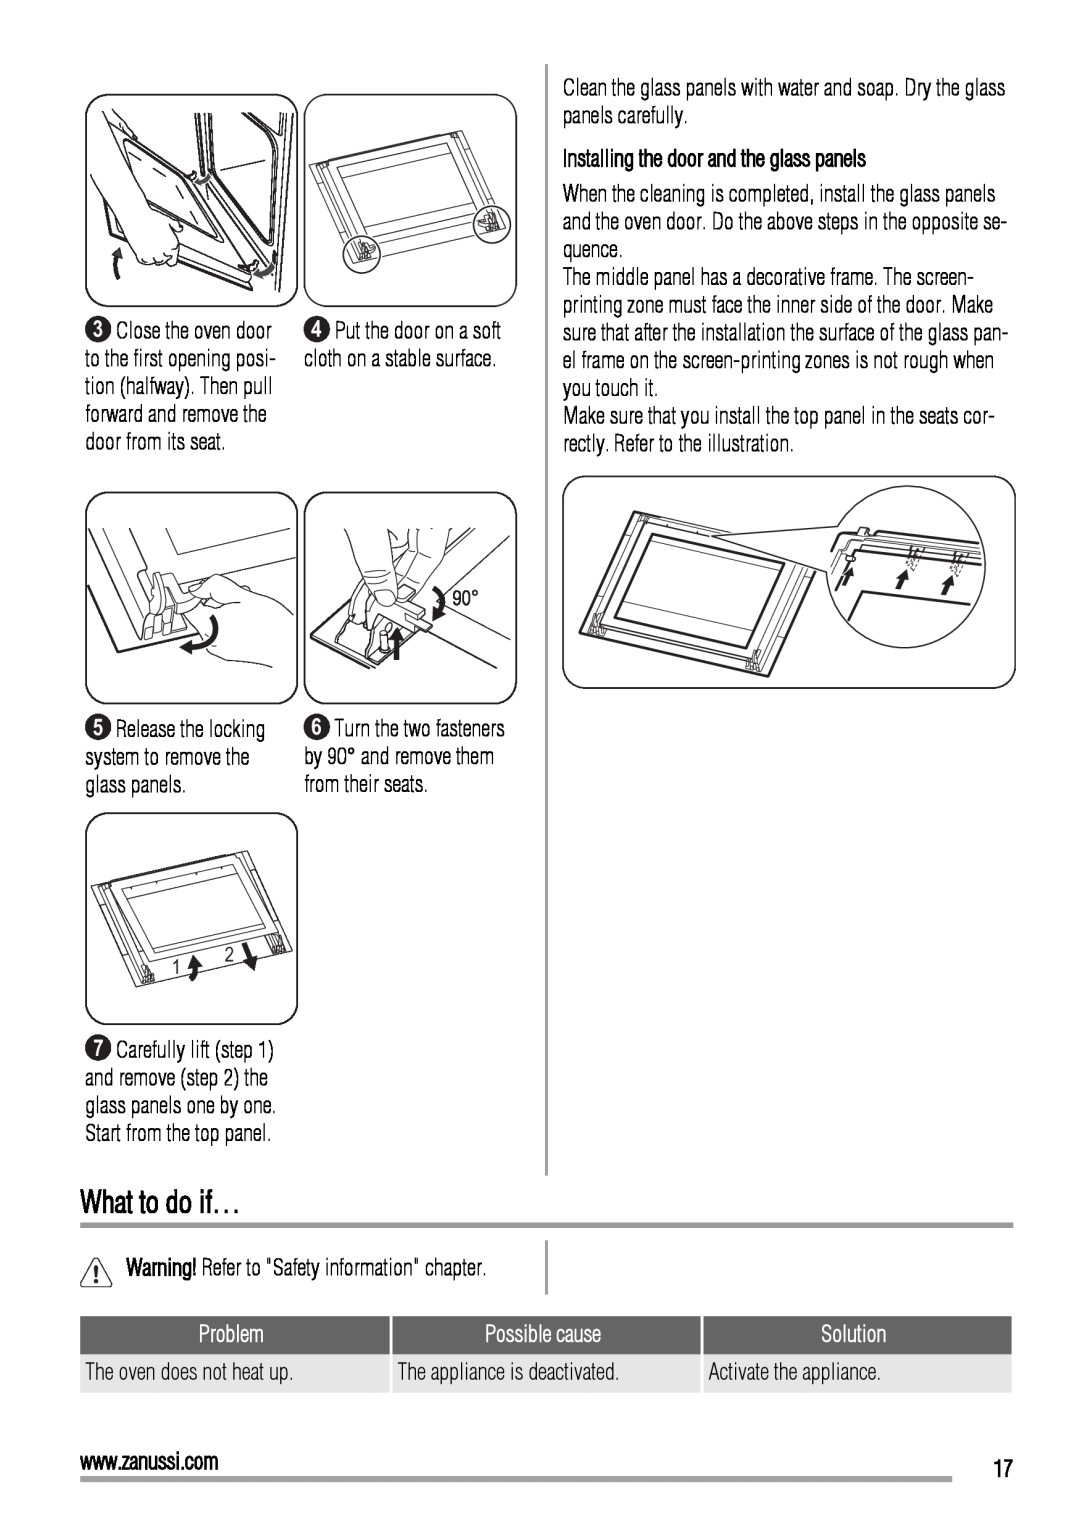 Zanussi ZOP37902 user manual What to do if…, Installing the door and the glass panels 